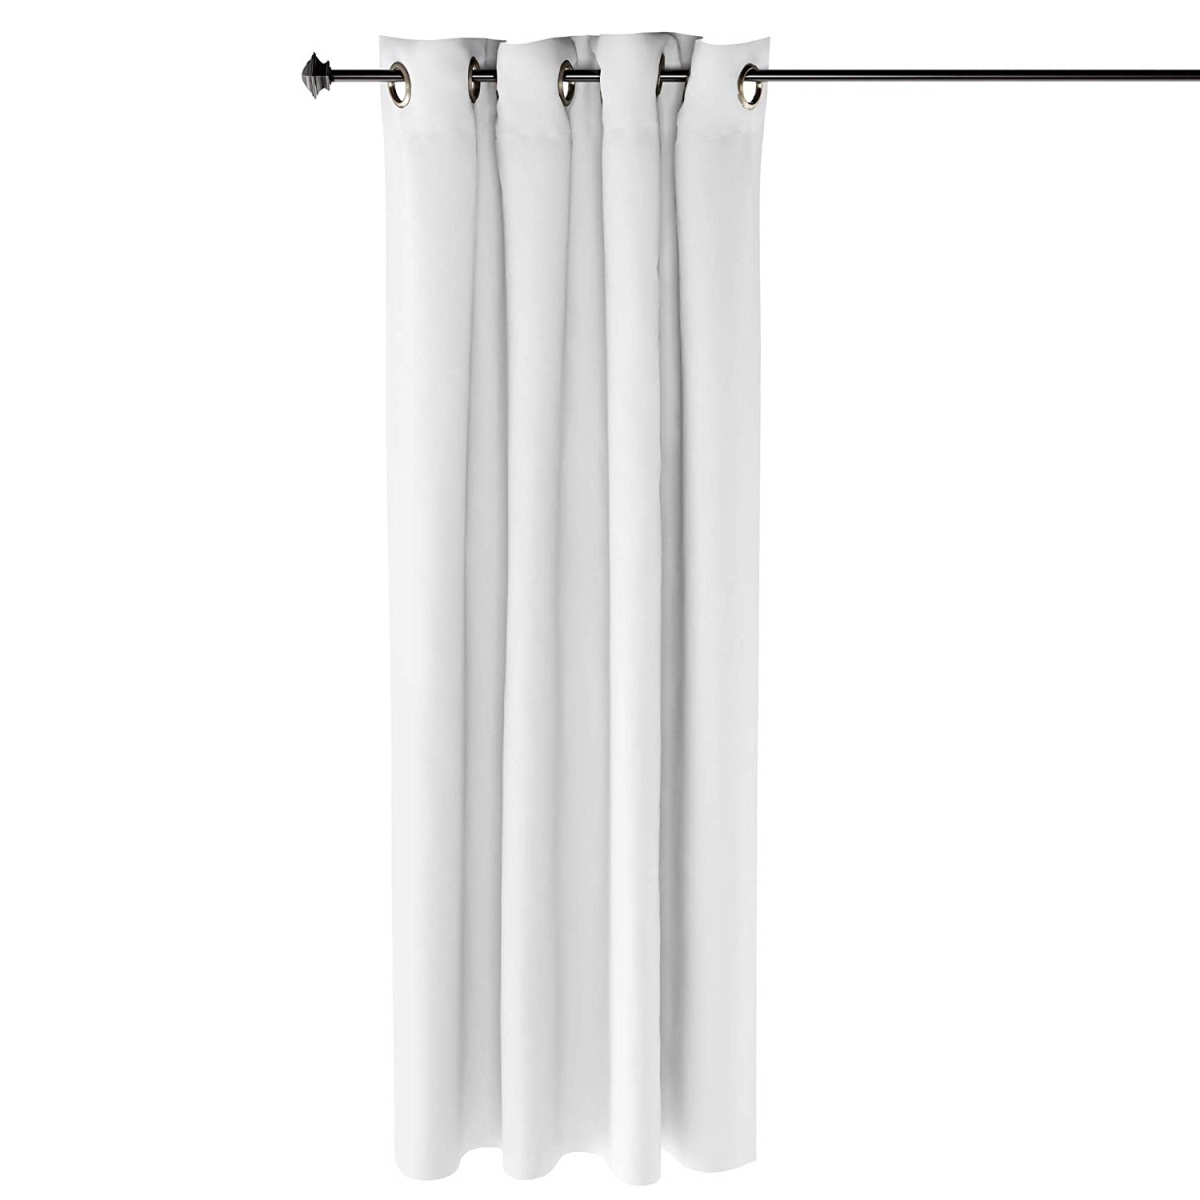 Fc66003wh Collins Blackout Curtain, 52 X 63 In. - 1 Panel - White